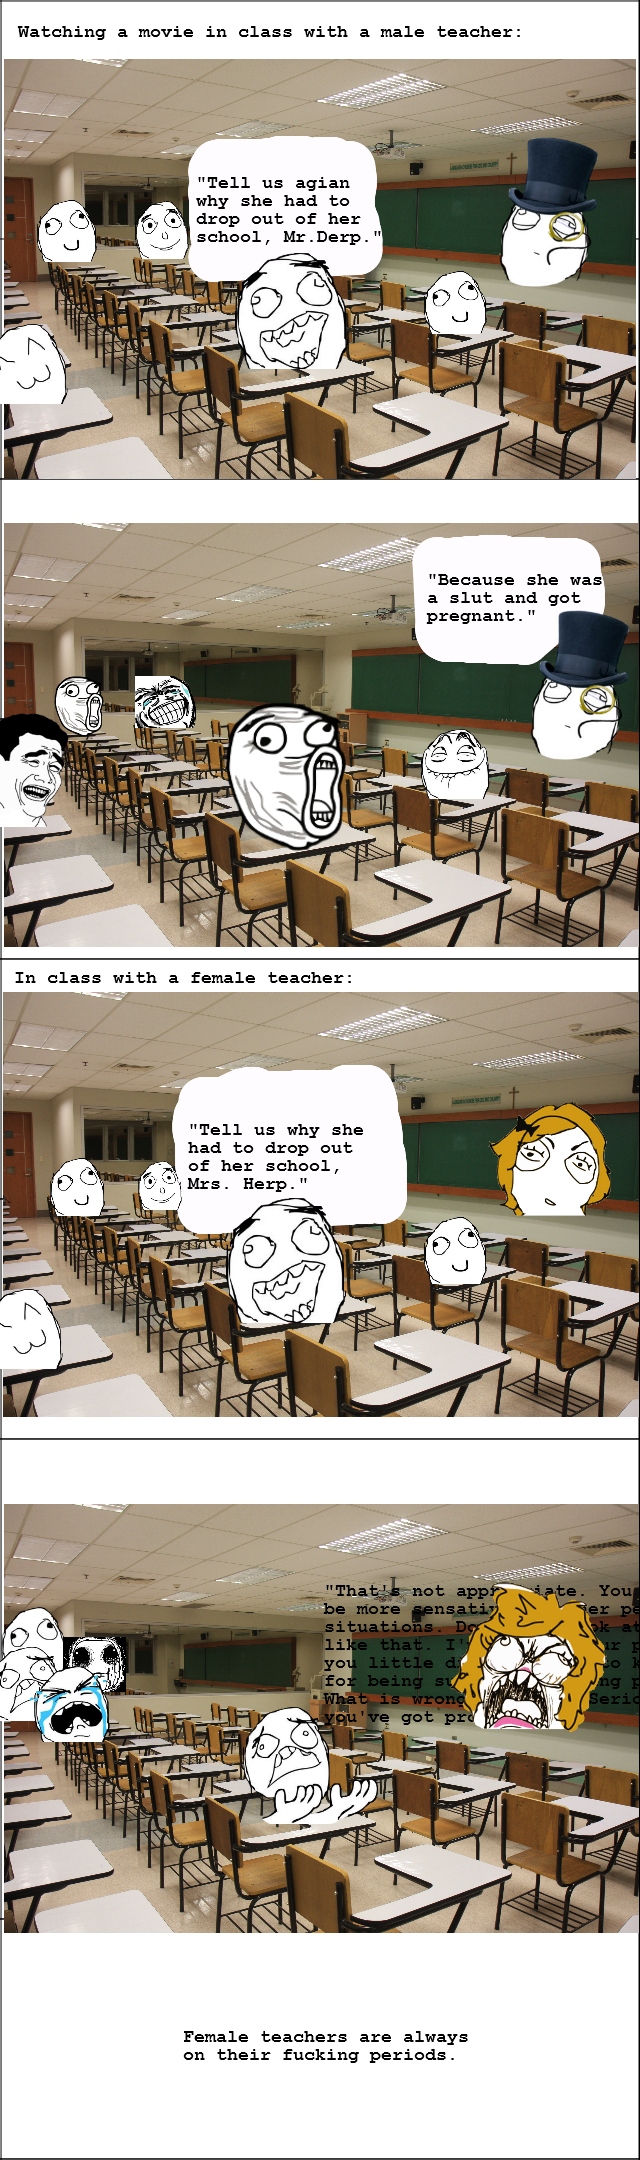 Male v.s. Female Teachers. An observation of teachers and reactions to students..